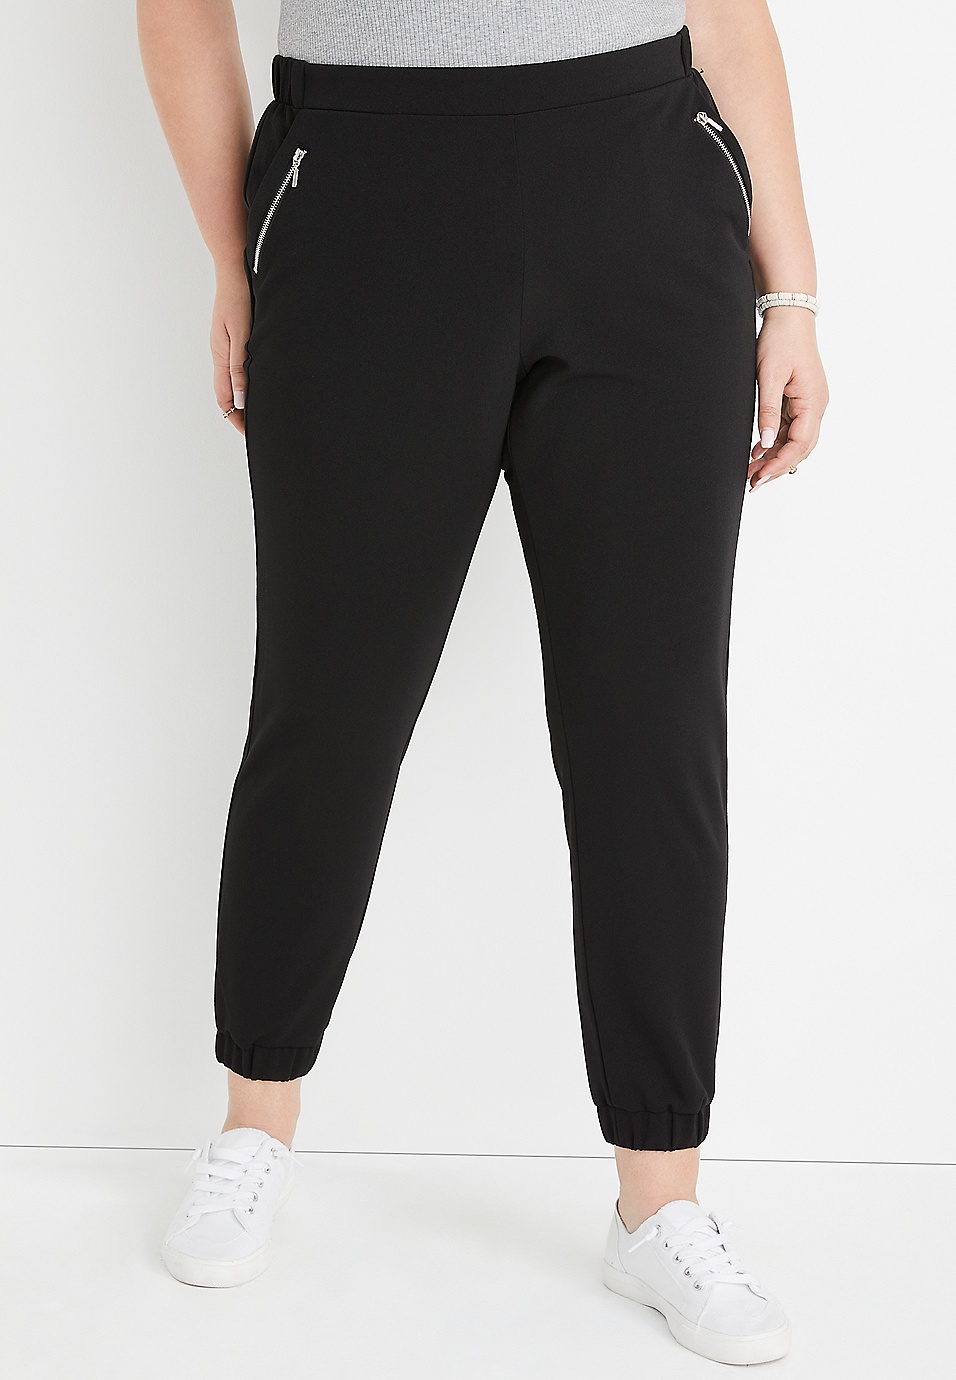 maurices Womens Zip Pocket Jogger